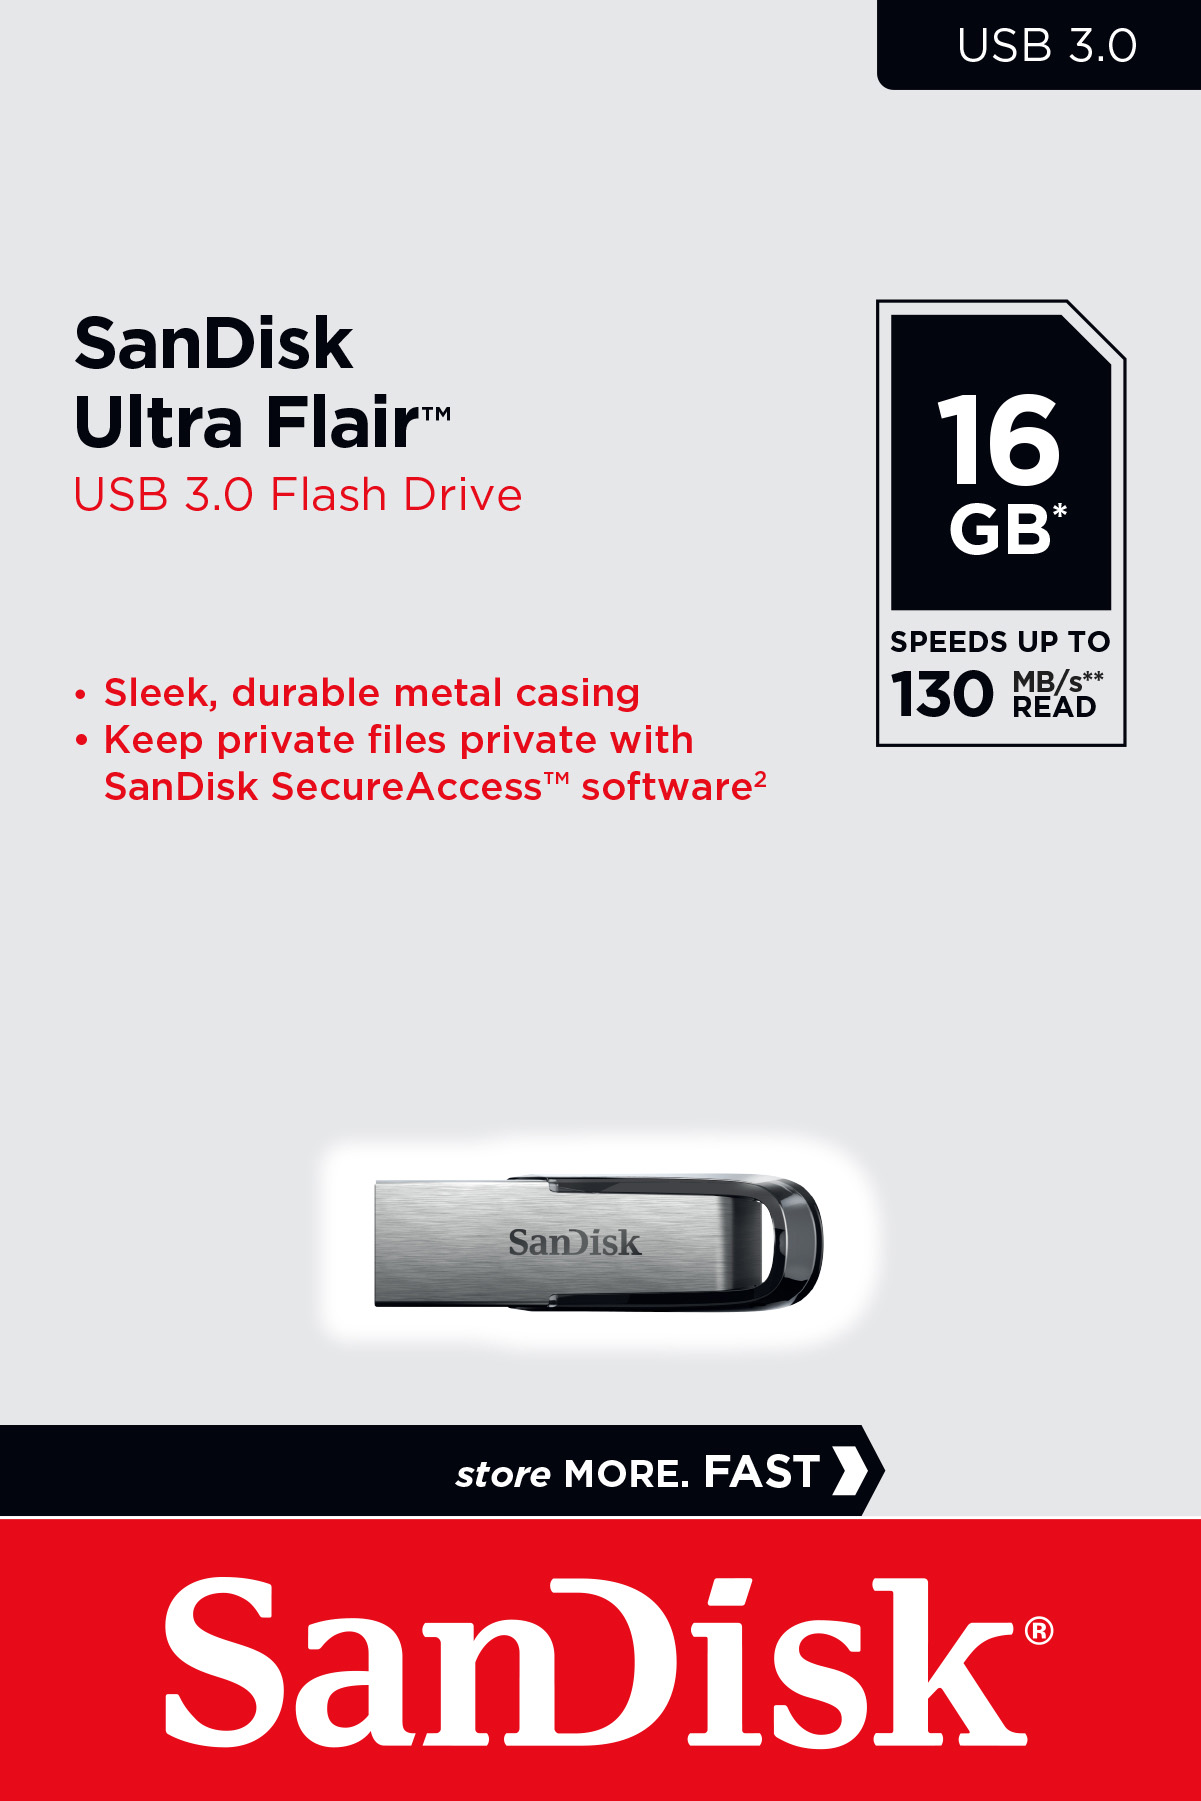 Sandisk USB 3.0 Stick 16GB, Ultra Flair Typ-A, (R) 130MB/s, SecureAccess, Retail-Blister